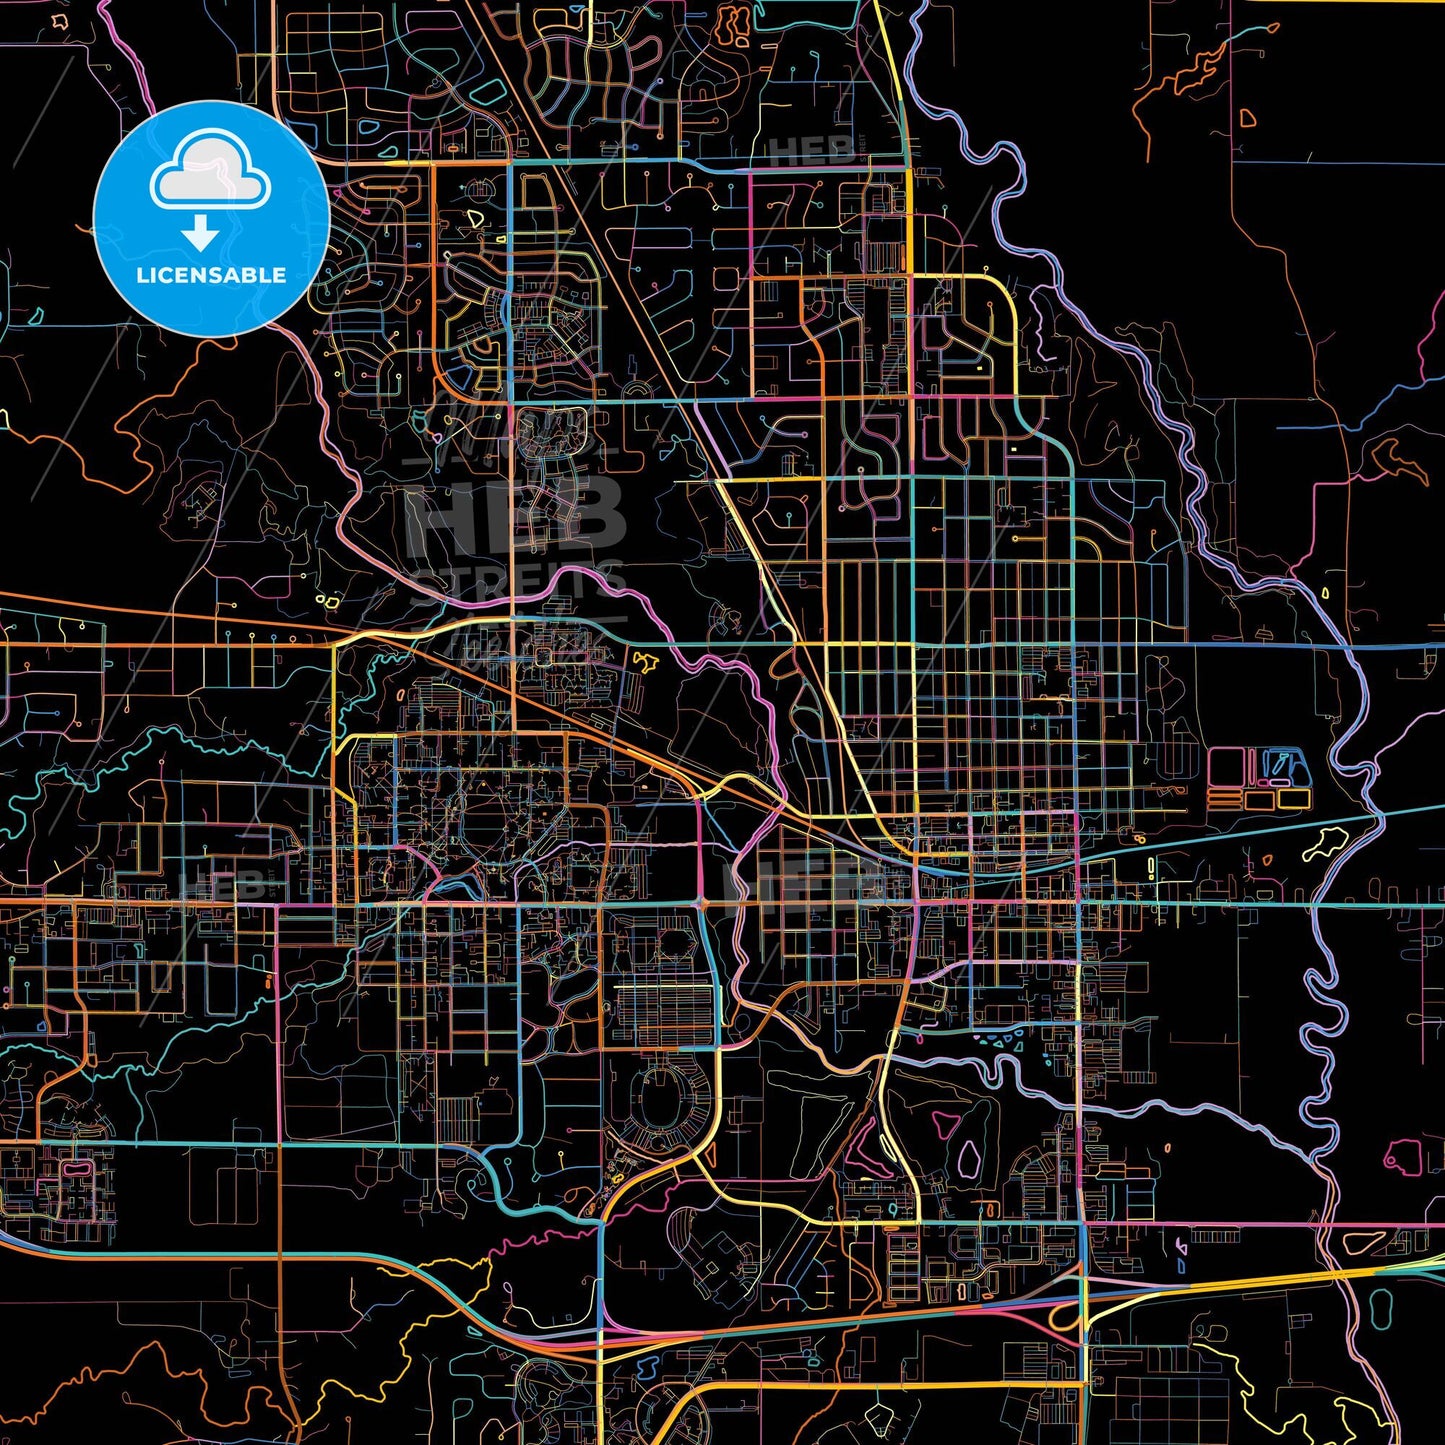 Ames, Iowa, United States, colorful city map on black background